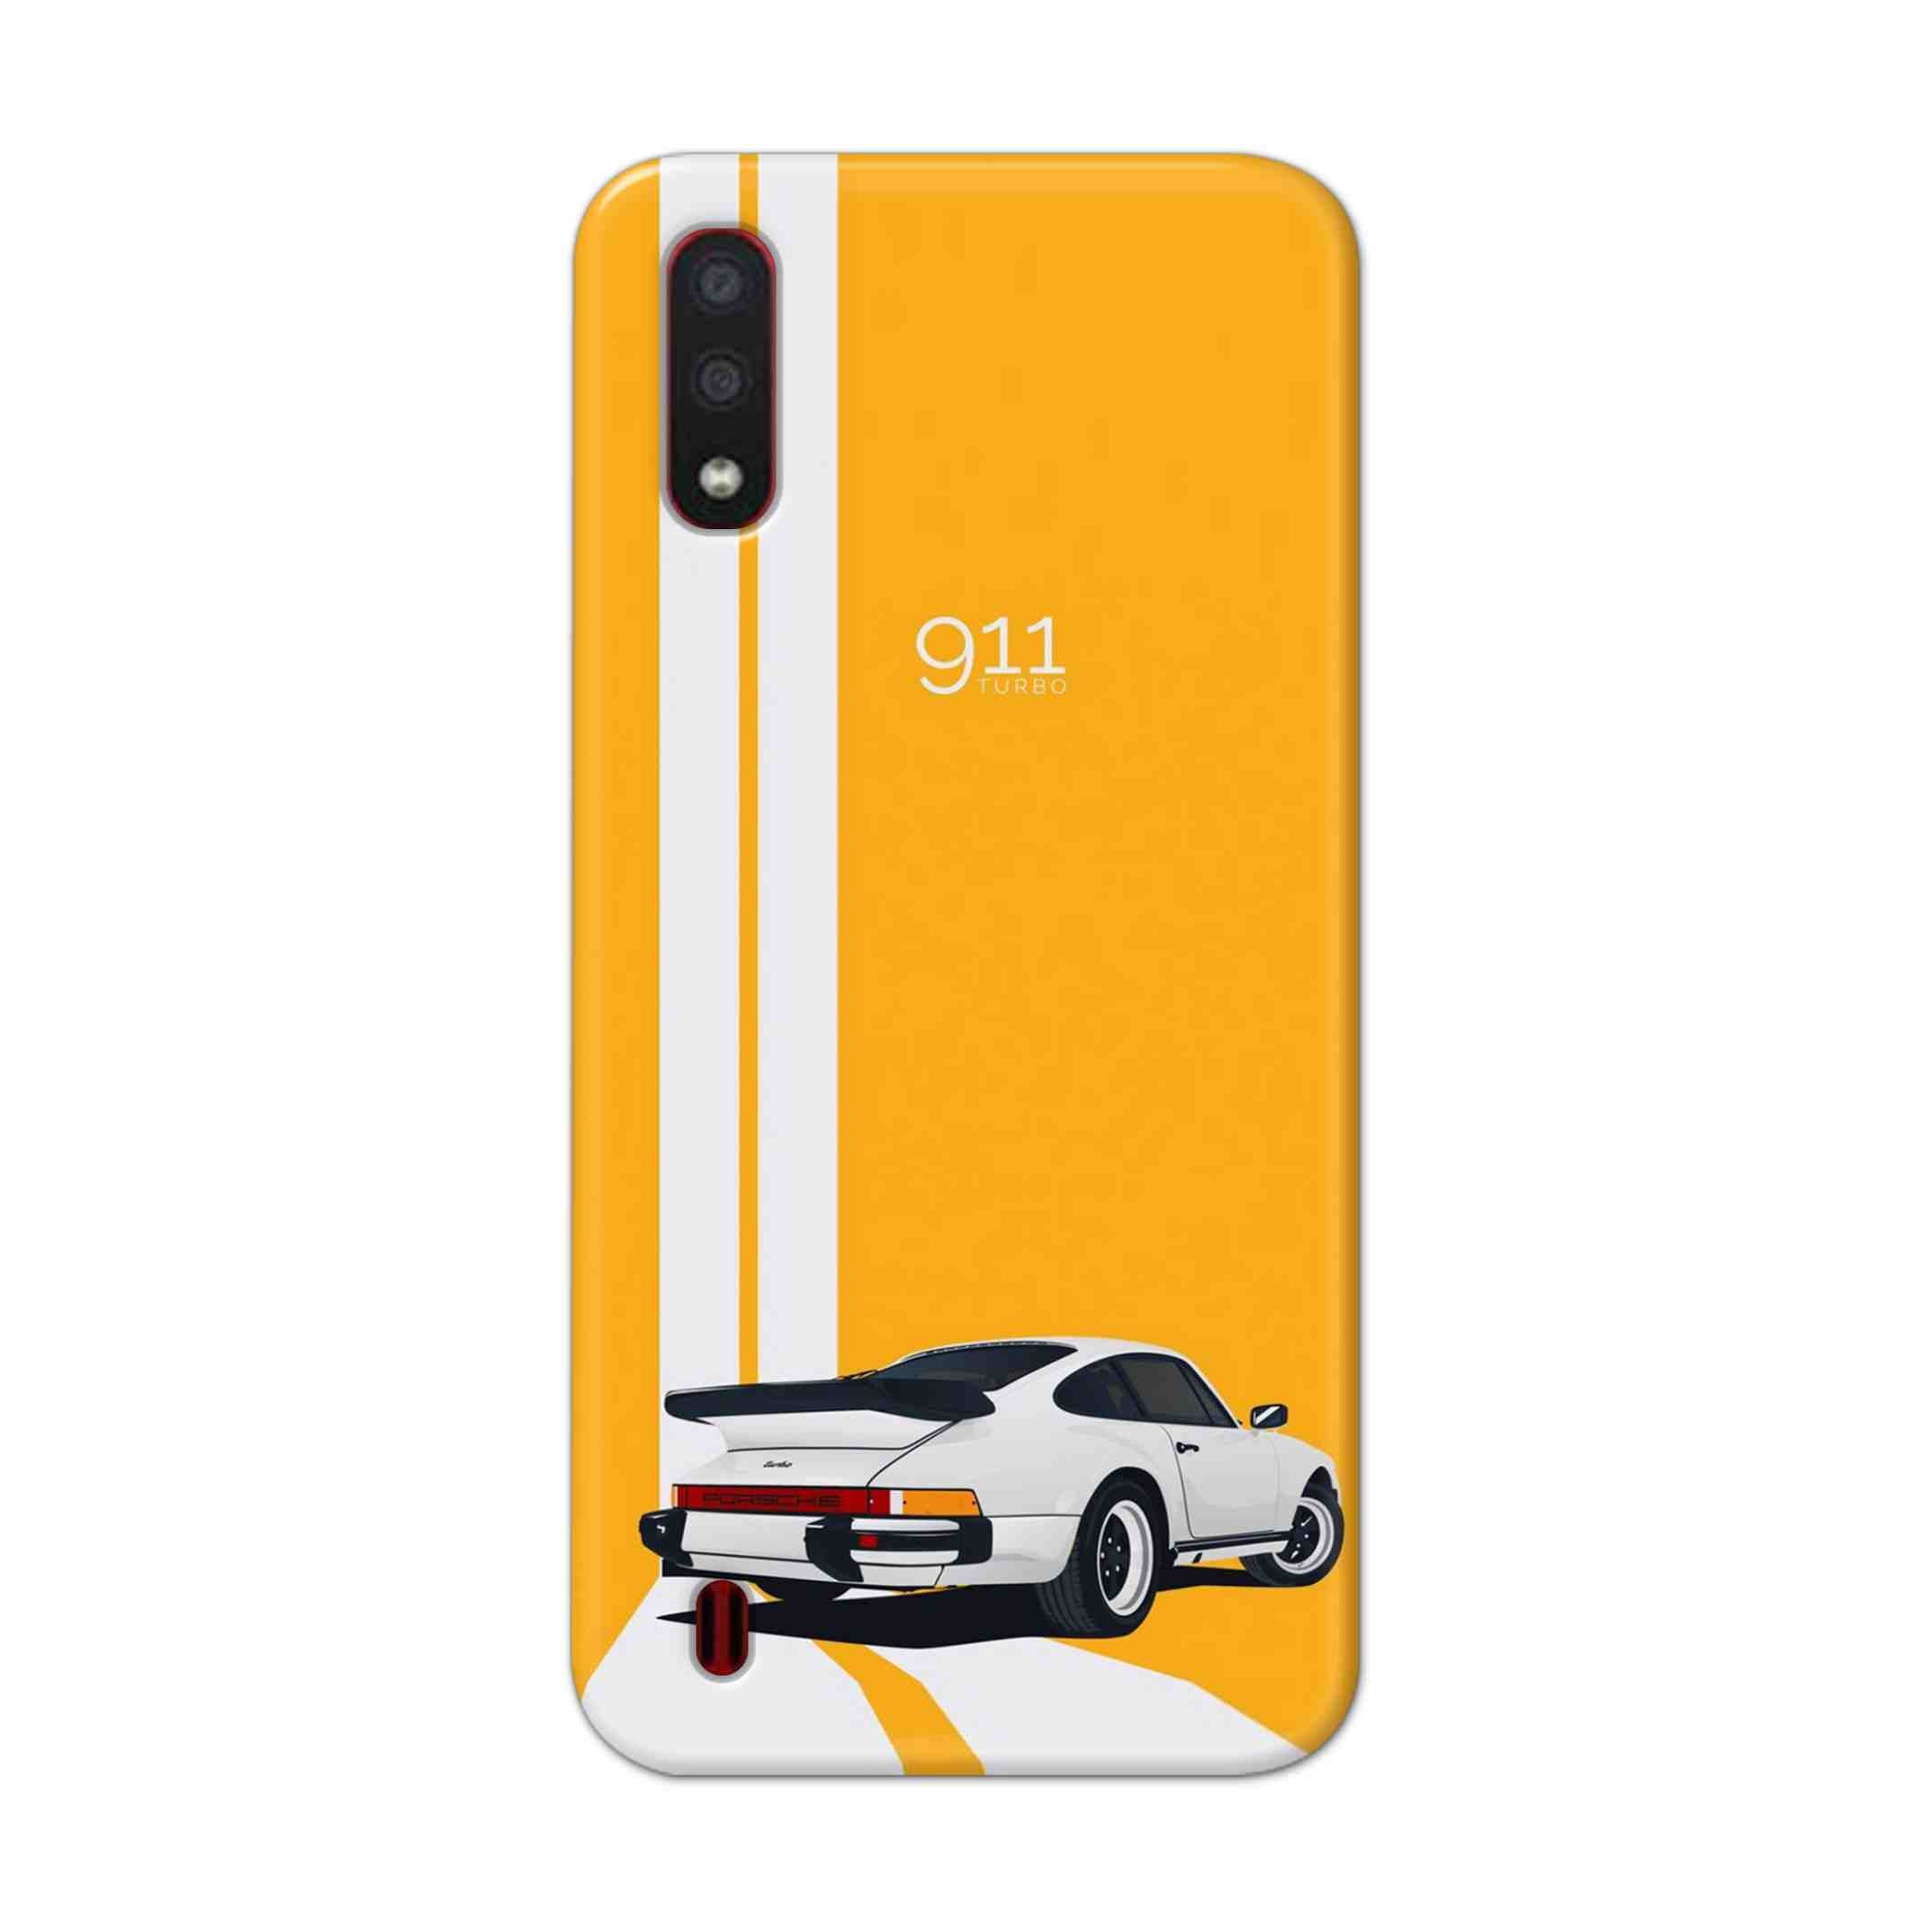 Buy 911 Gt Porche Hard Back Mobile Phone Case/Cover For Samsung Galaxy M01 Online